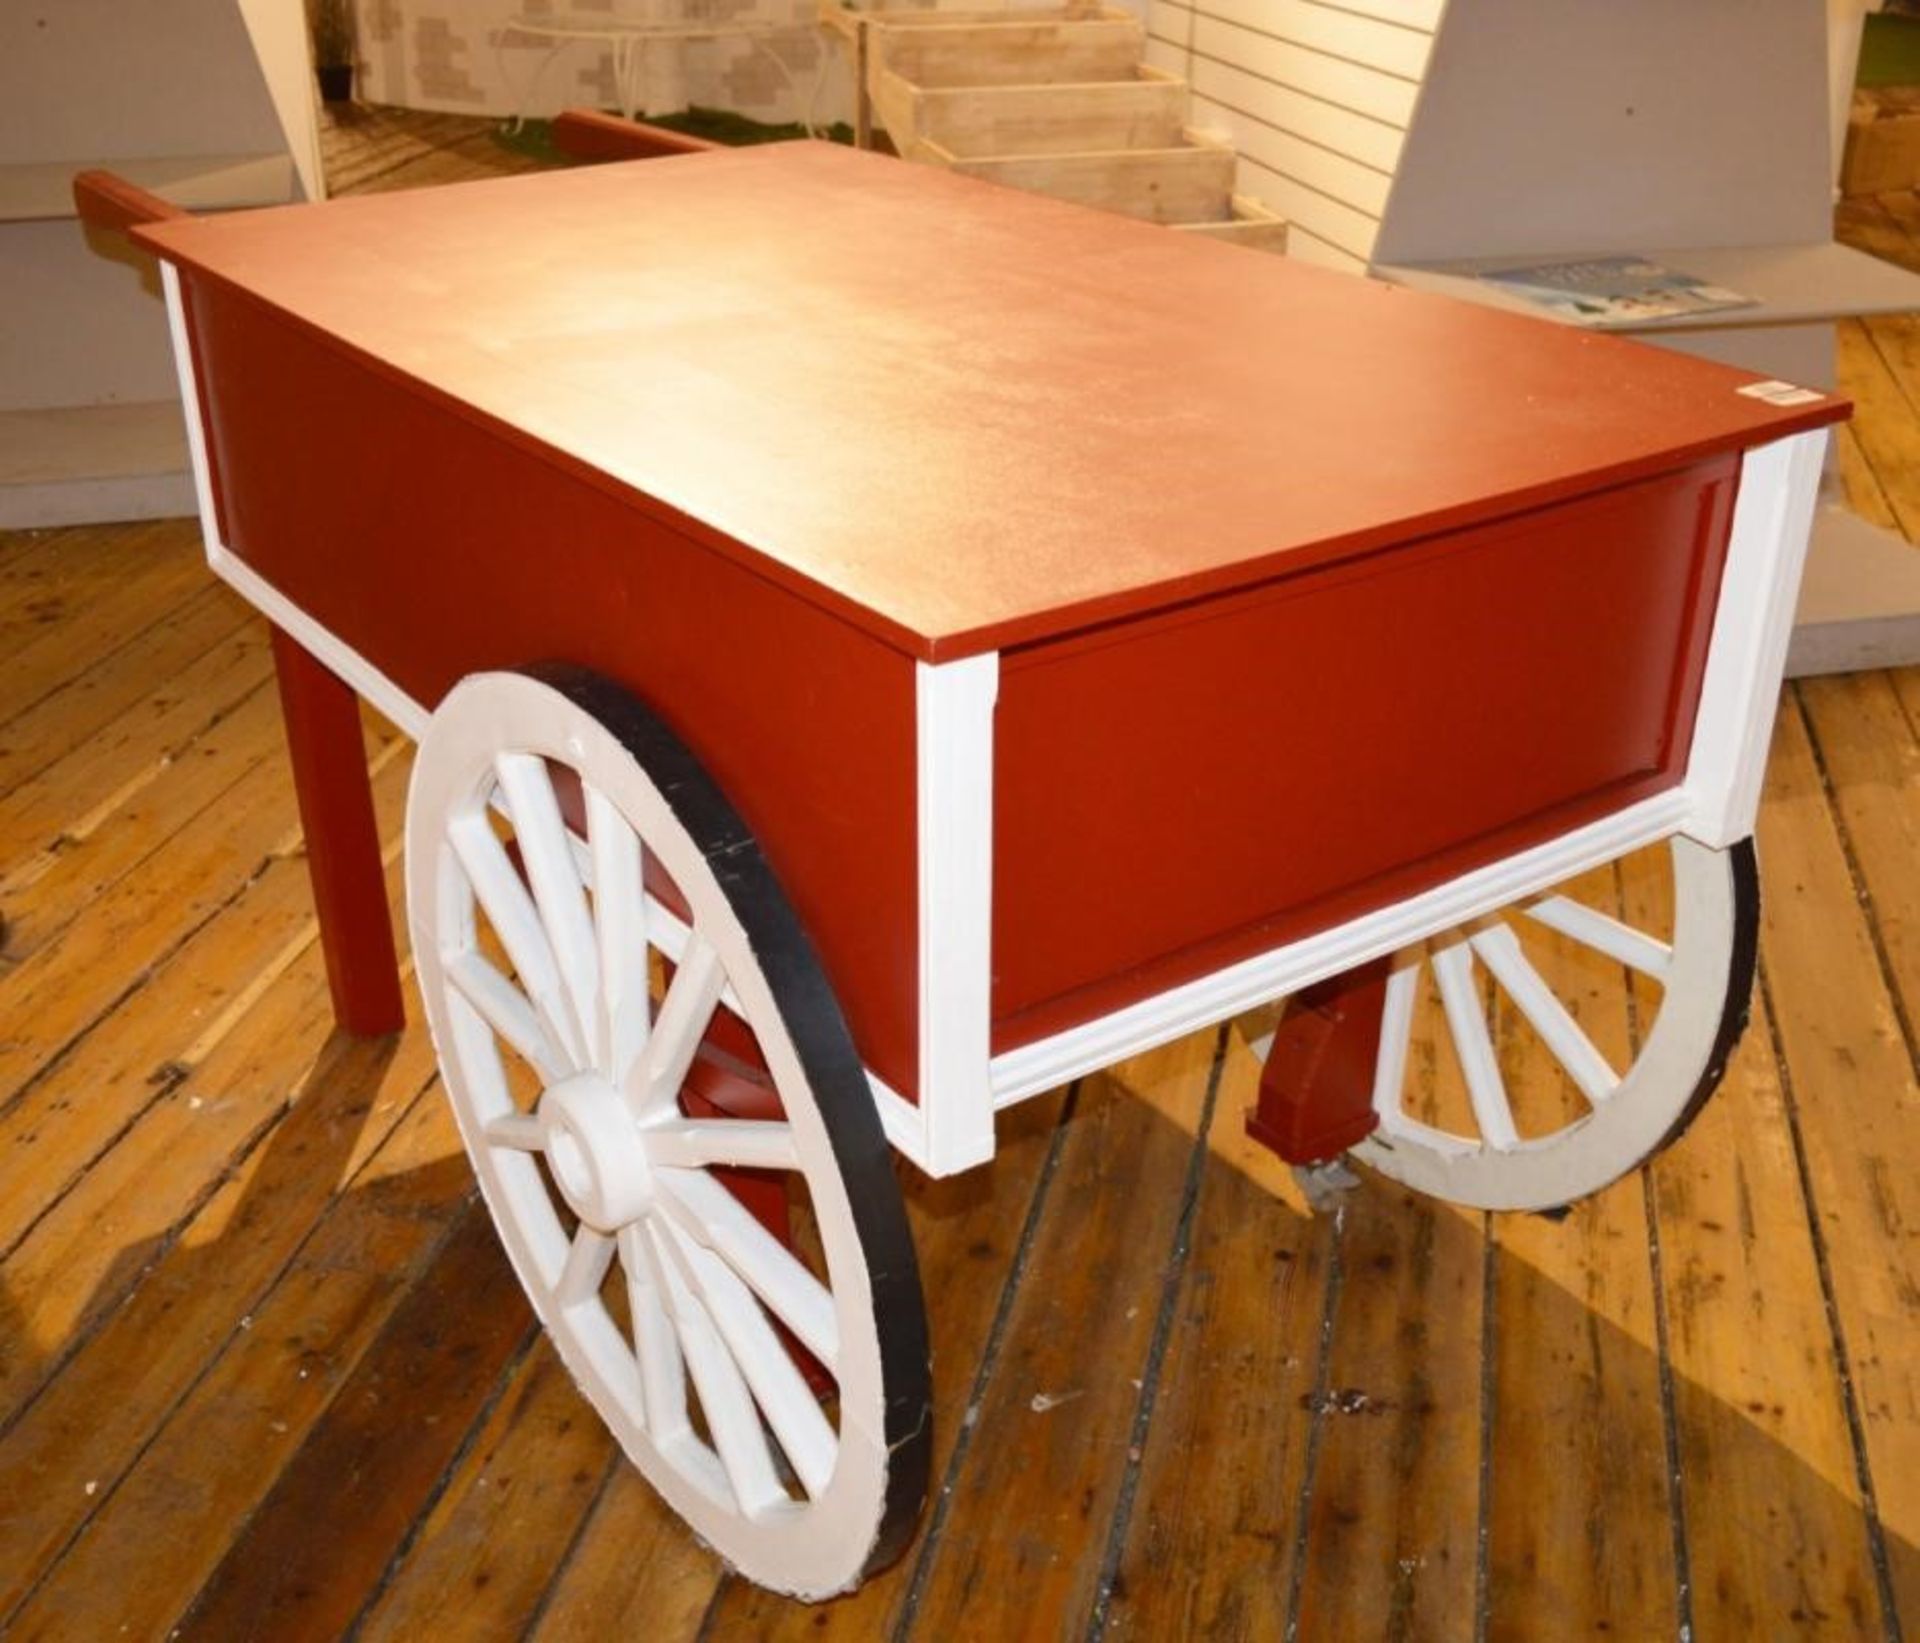 1 x Retail Display Cart in Red - H94 x W95 x D150 (204 with handles) cms - Ref BB376 TF - CL351 - Lo - Image 5 of 5